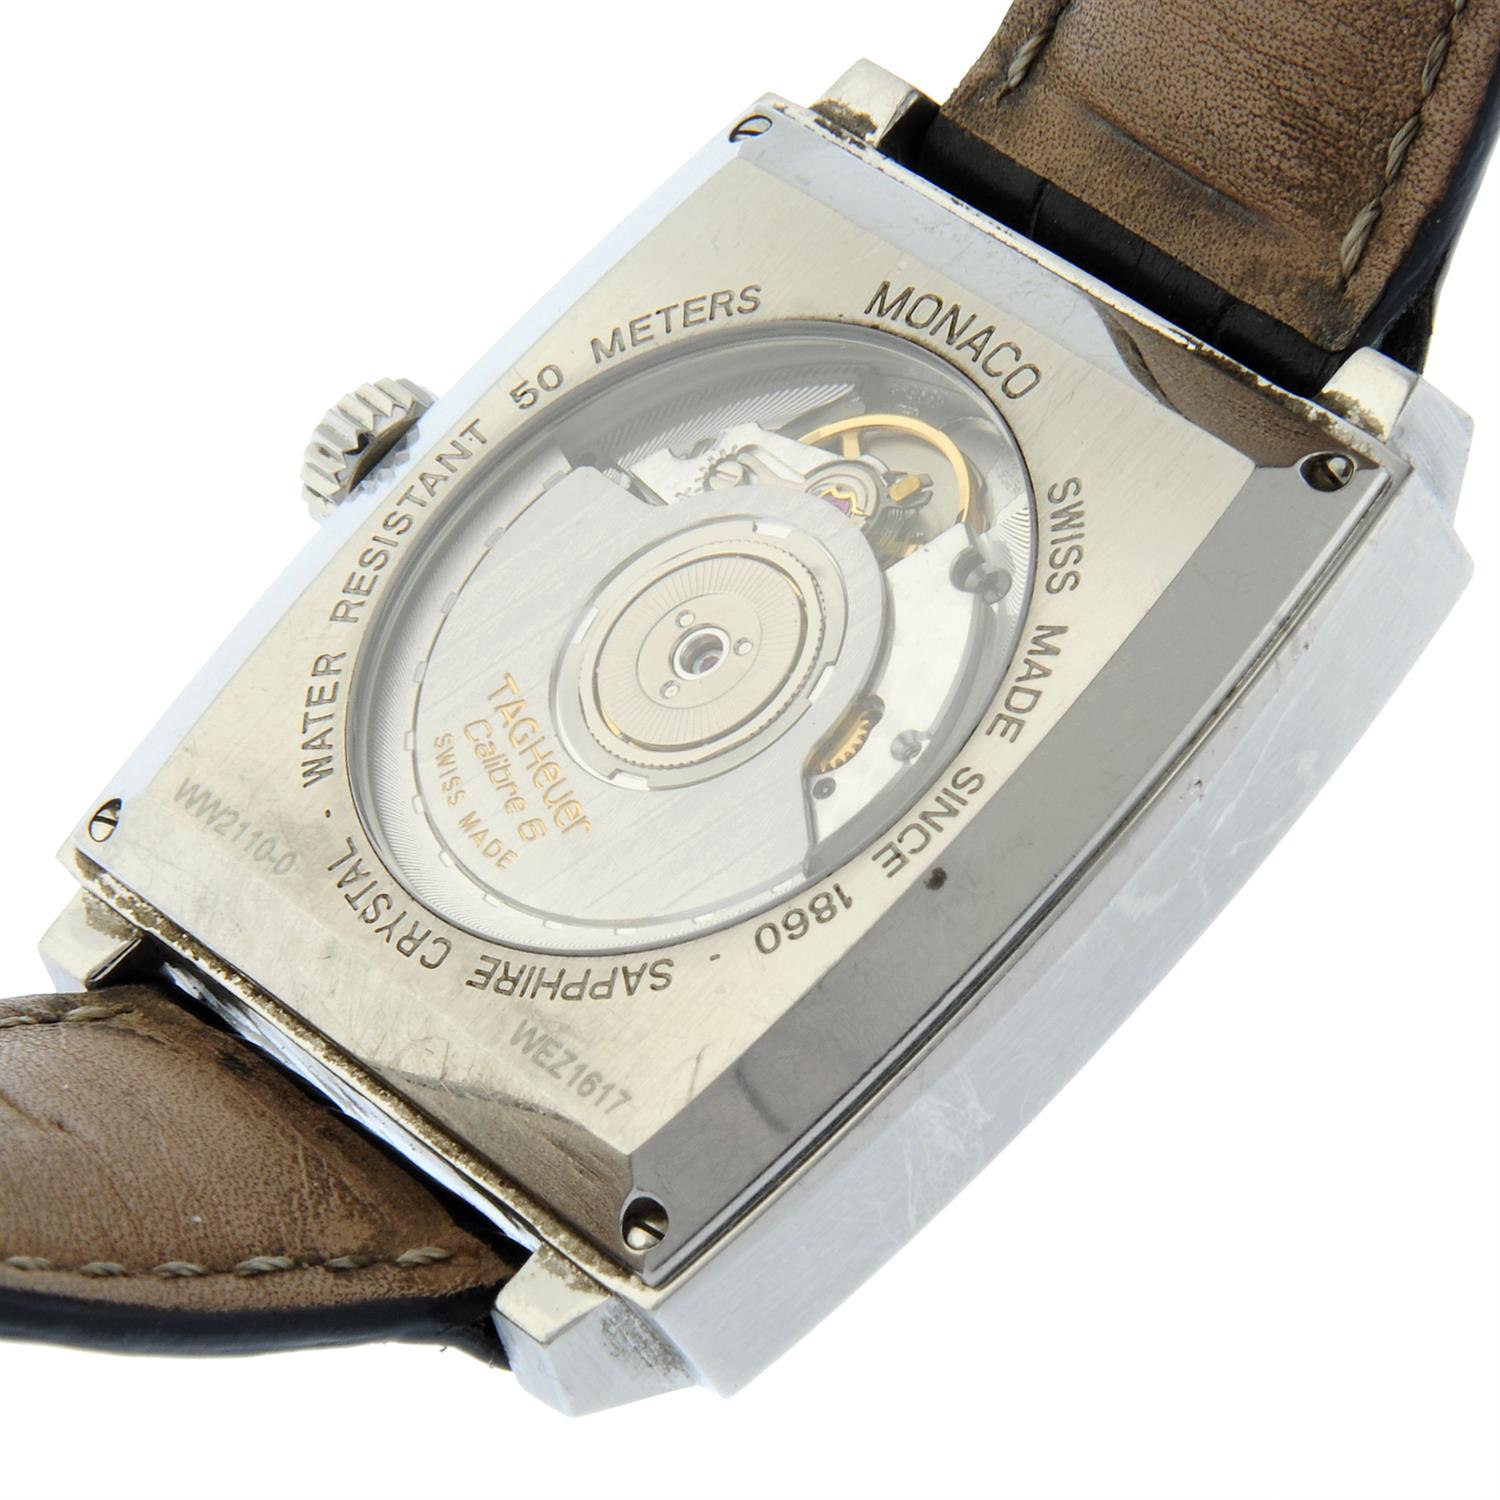 TAG Heuer - a Monaco watch, 36mm. - Image 4 of 4